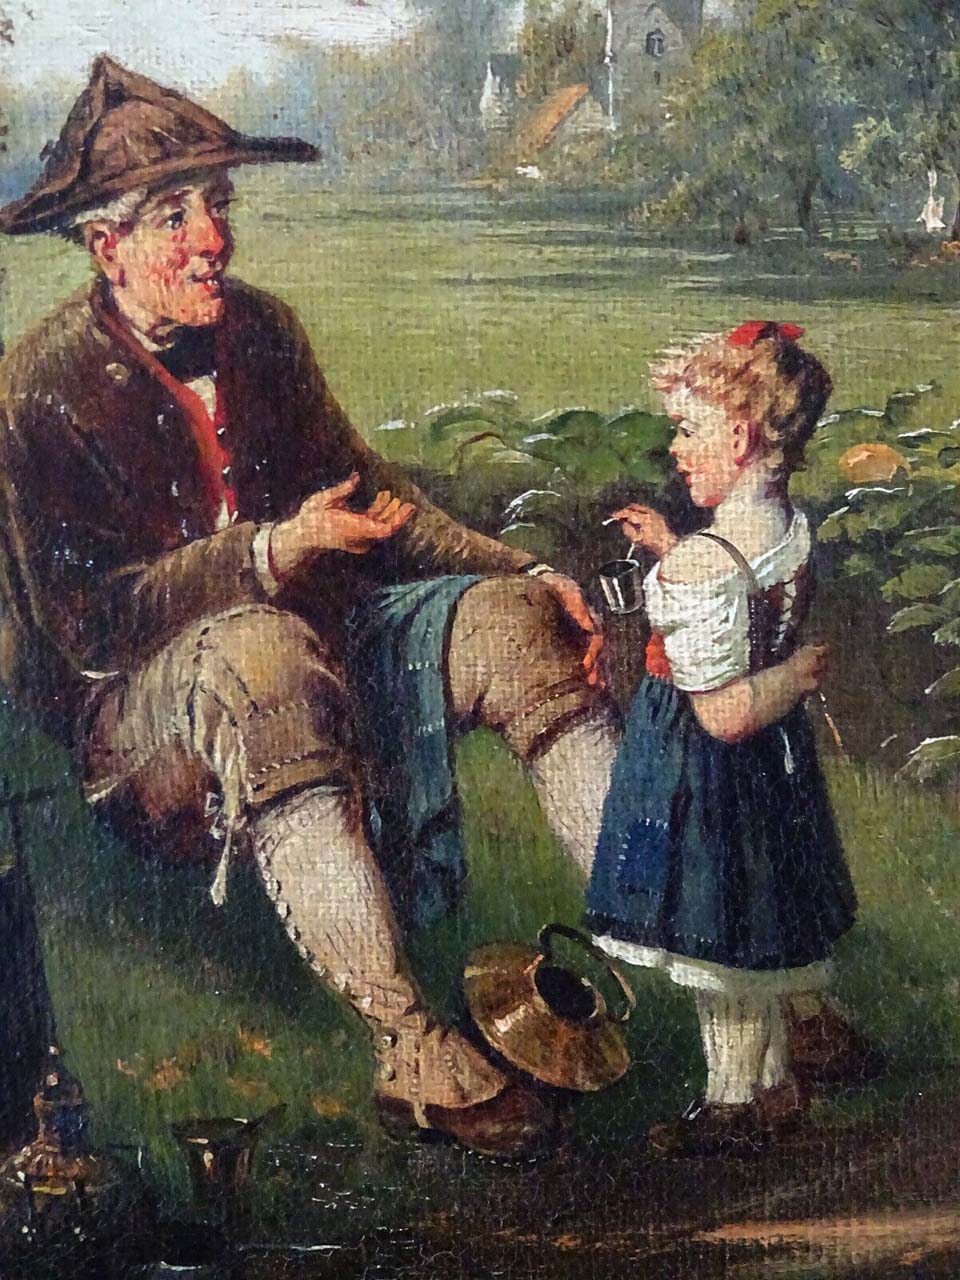 The sutler in the country - detail